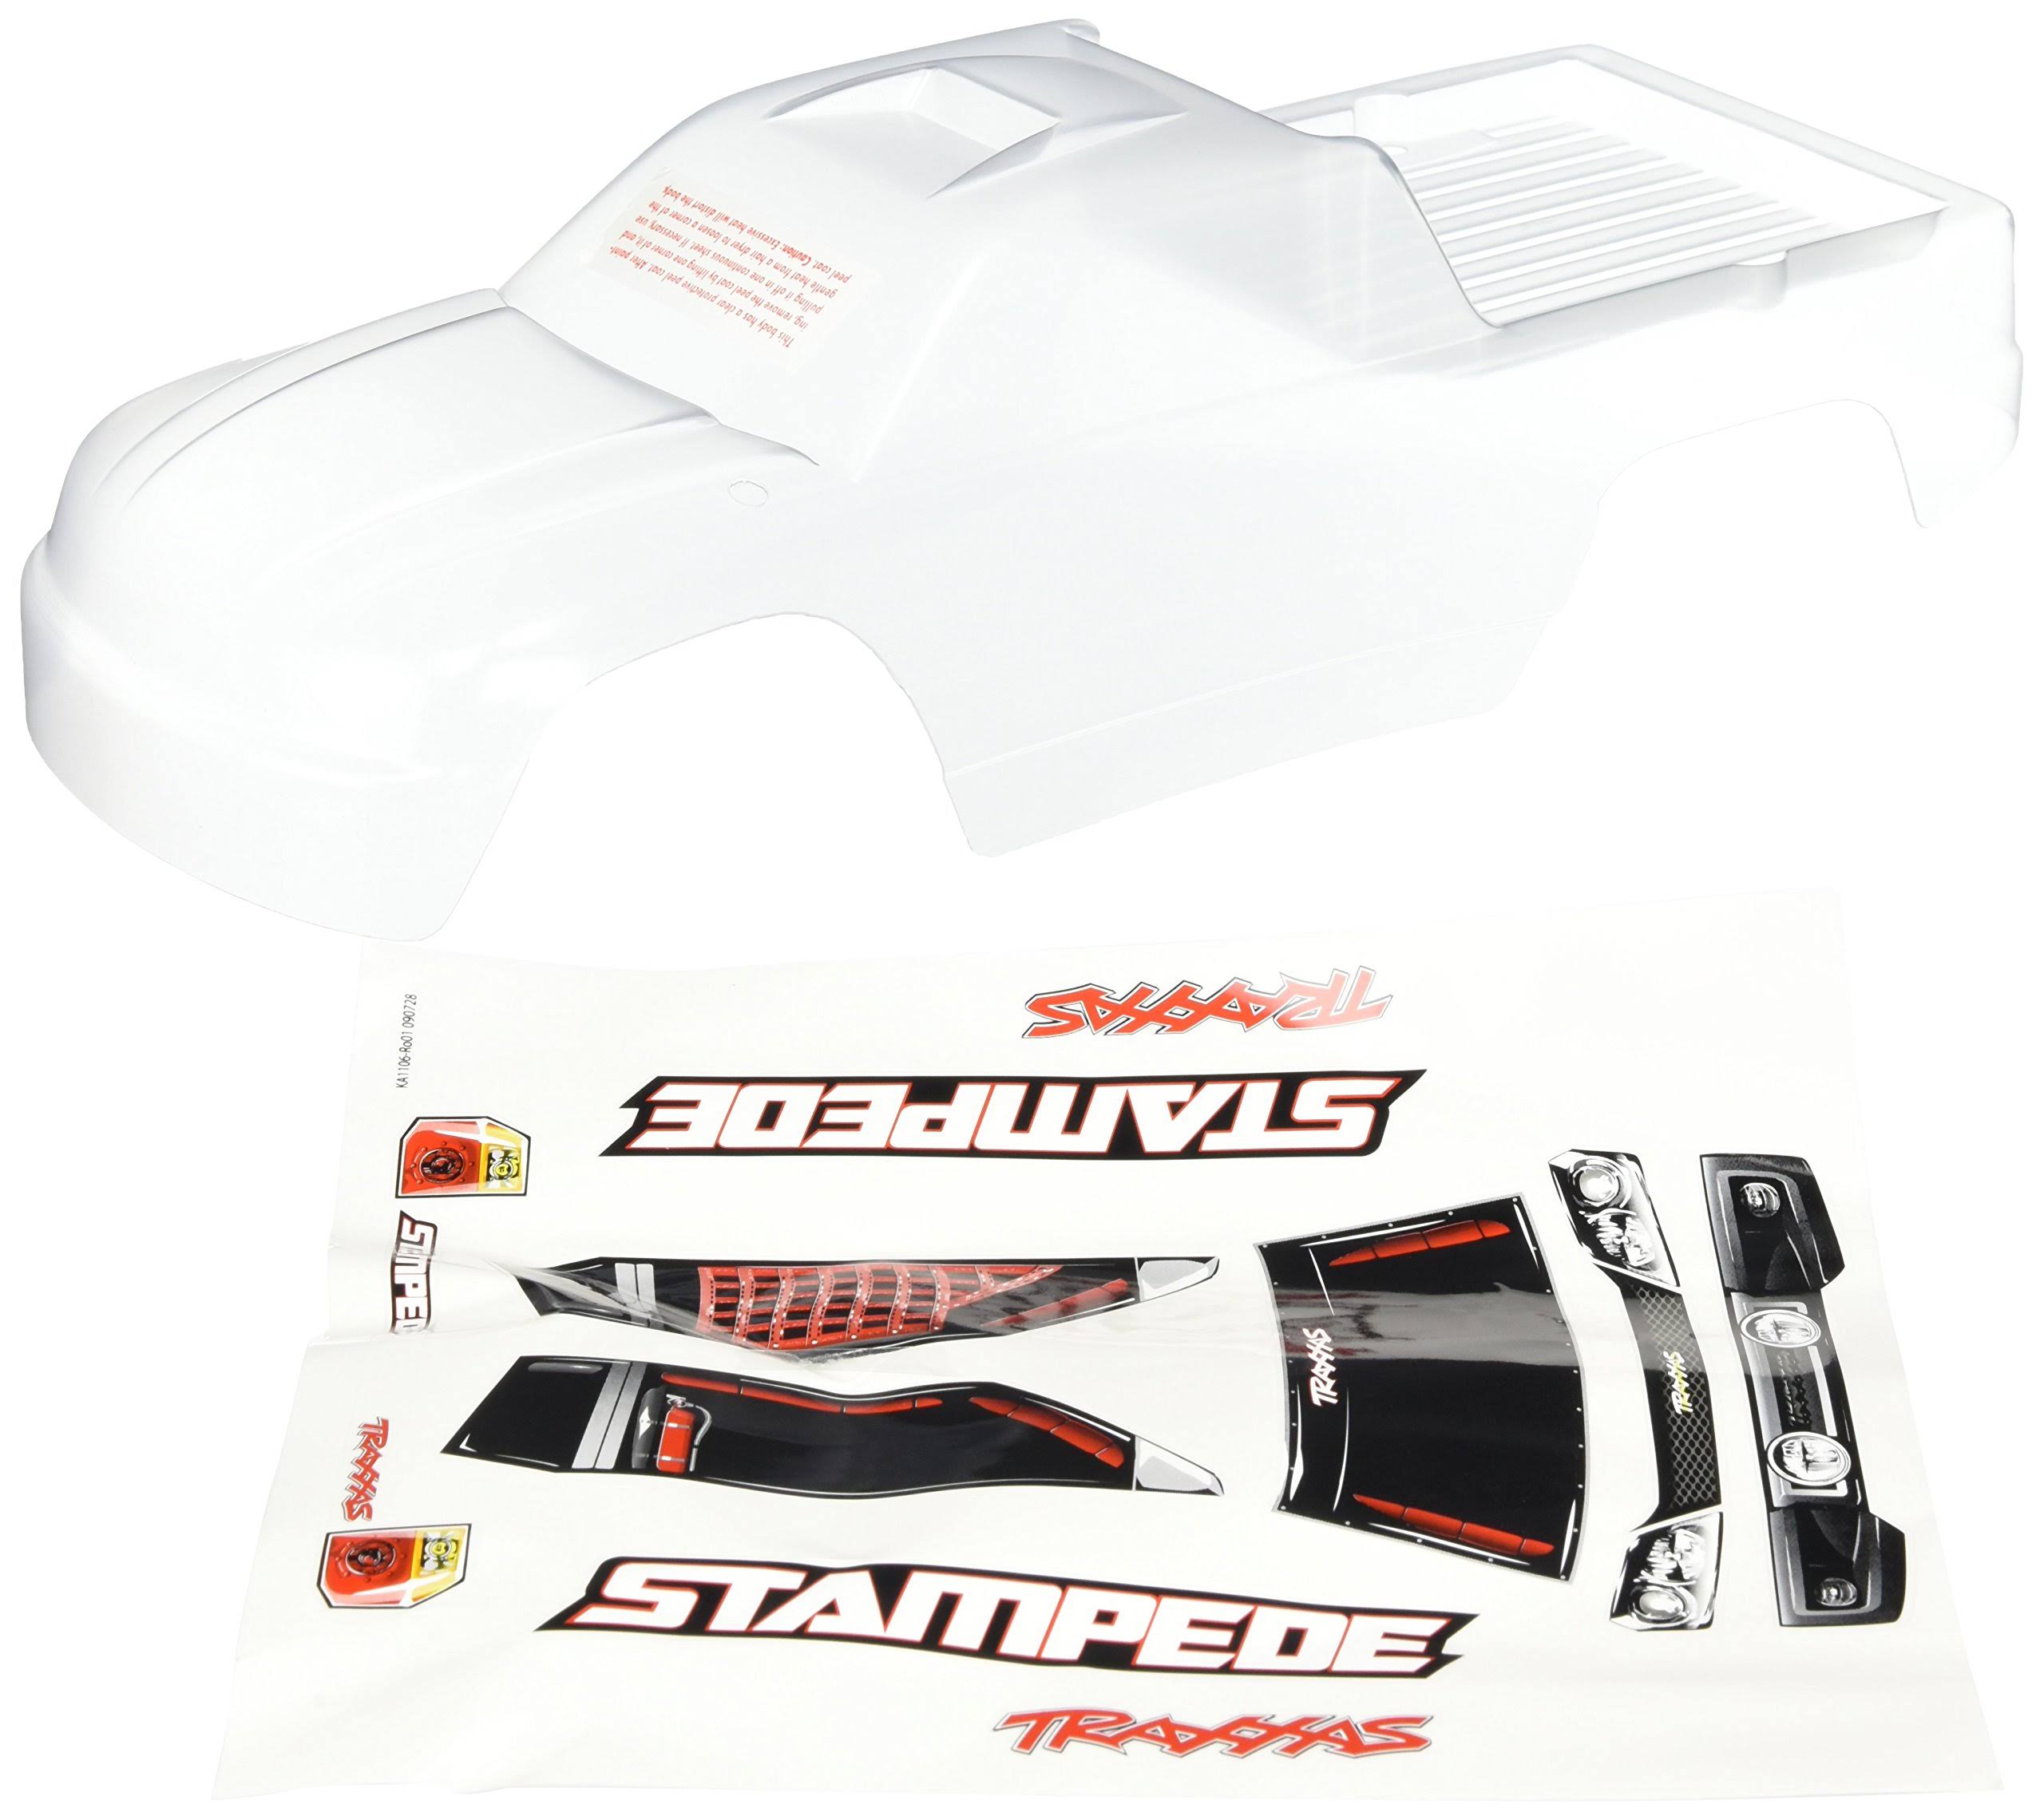 Traxxas Stampede Clear Body